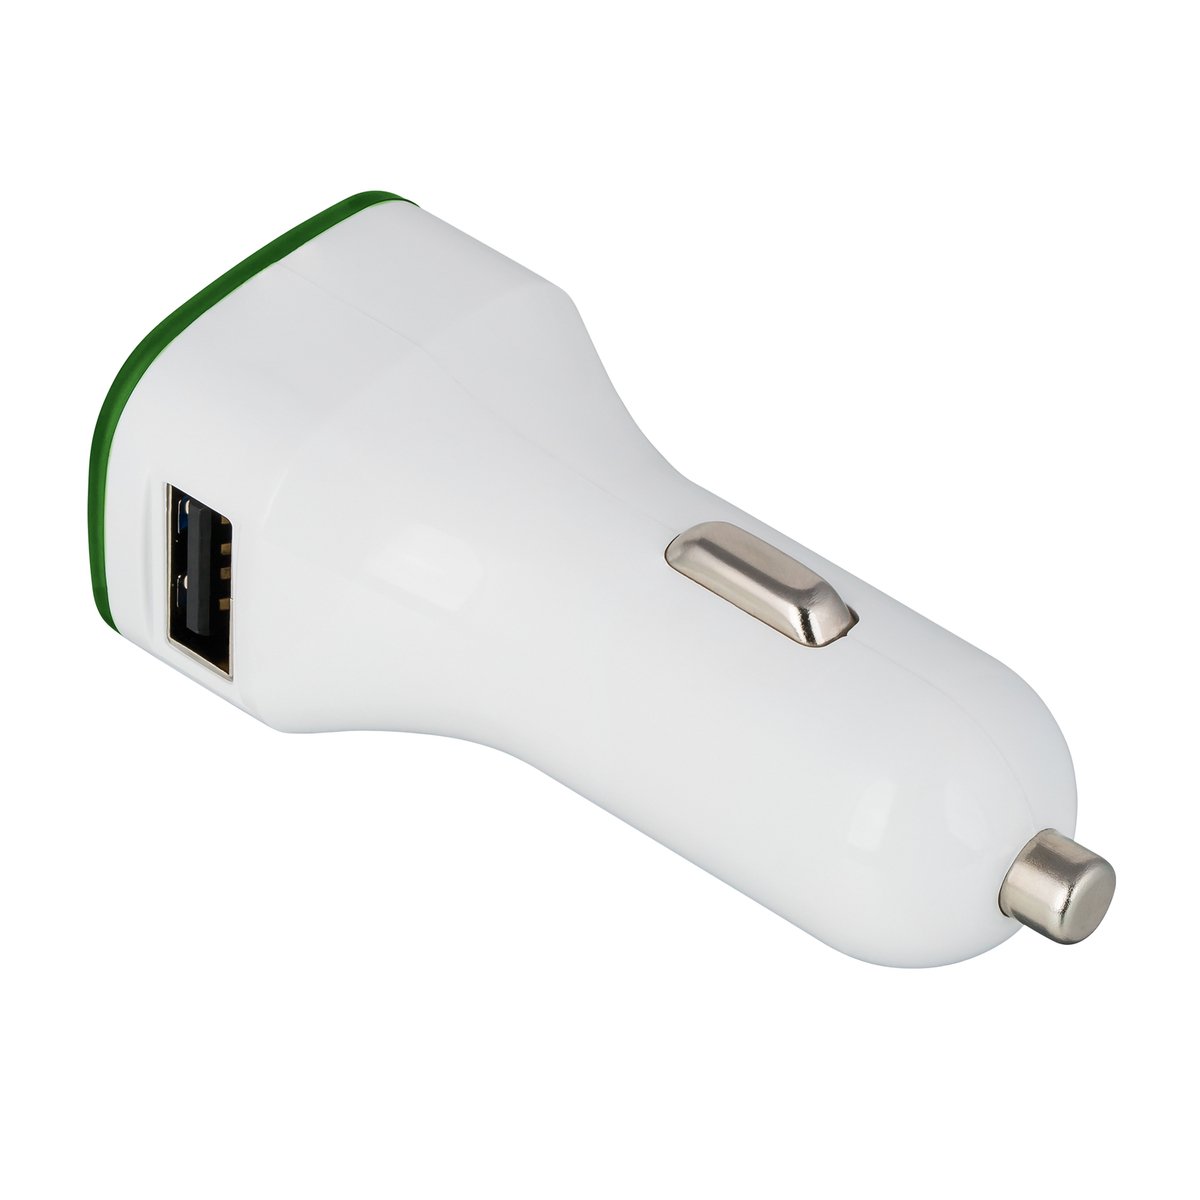 USB car charger adapter COLLECTION 500 green